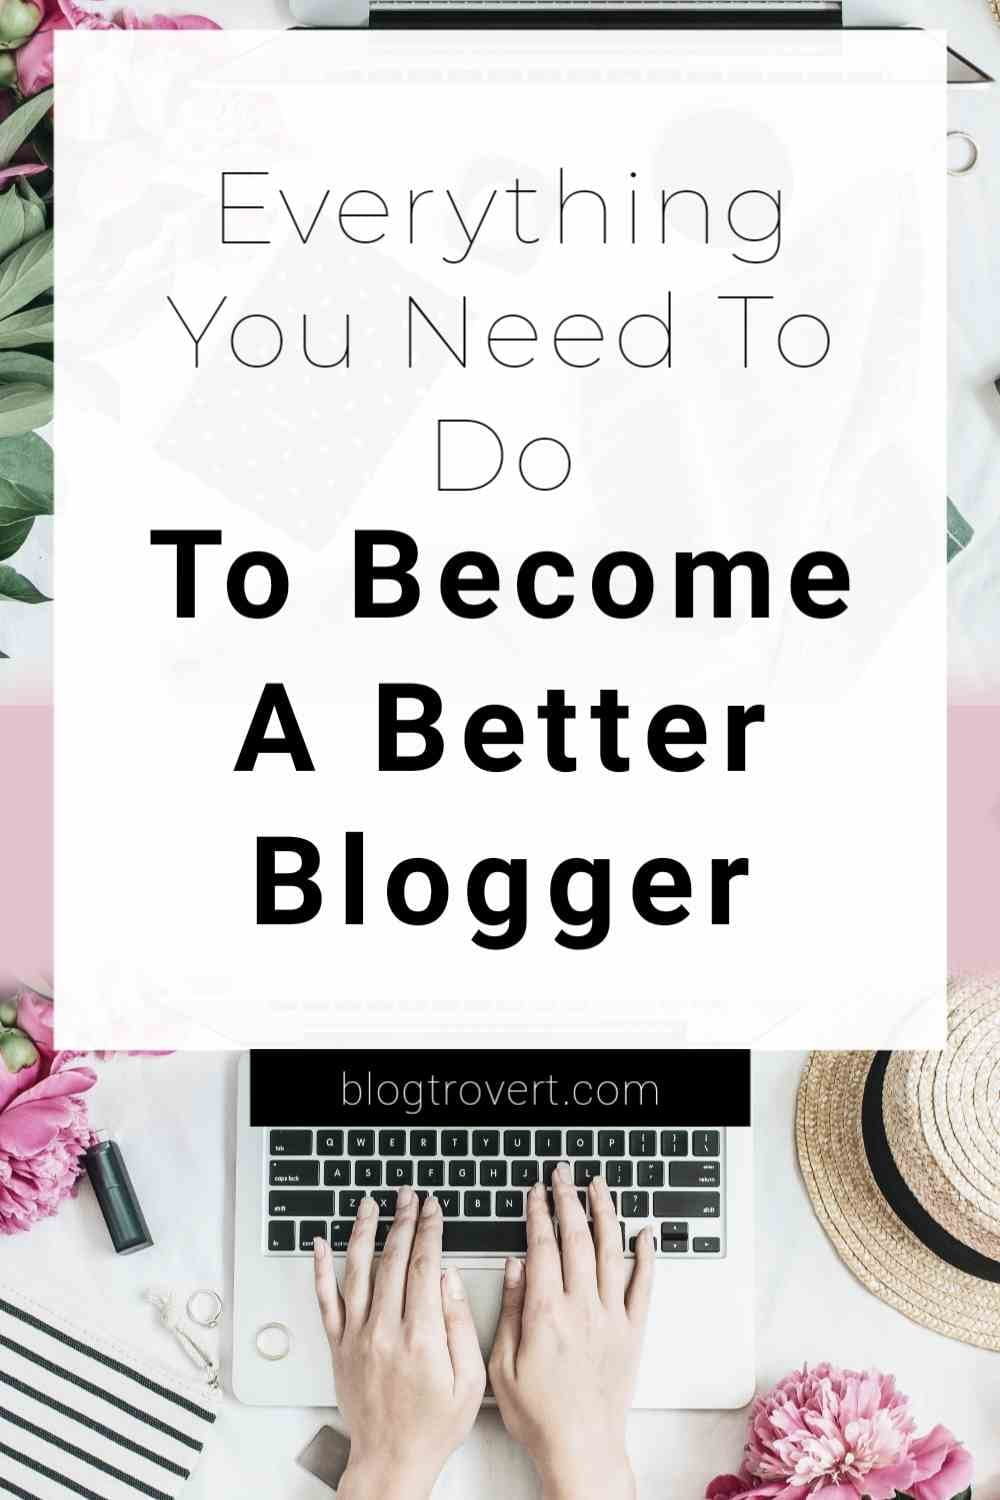 How To Become a Better Blogger - 13 helpful guides for Amateur bloggers 2